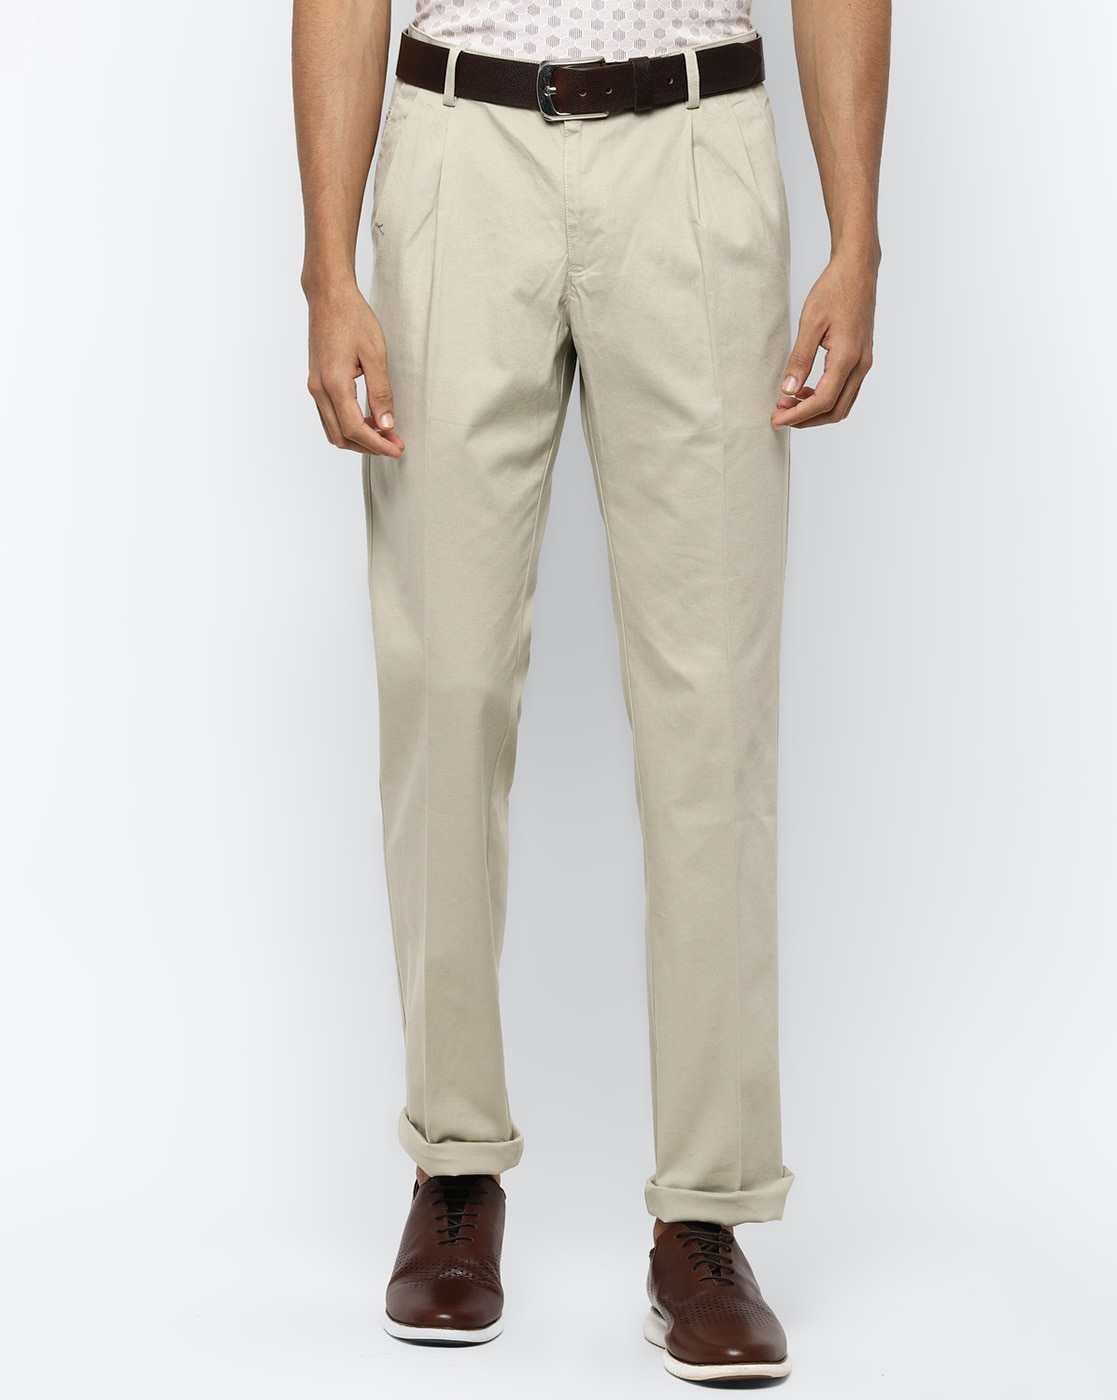 Buy Allen Solly Men's Relaxed Fit Formal Trousers (AMTF315G06865_Grey_30W x  L) at Amazon.in